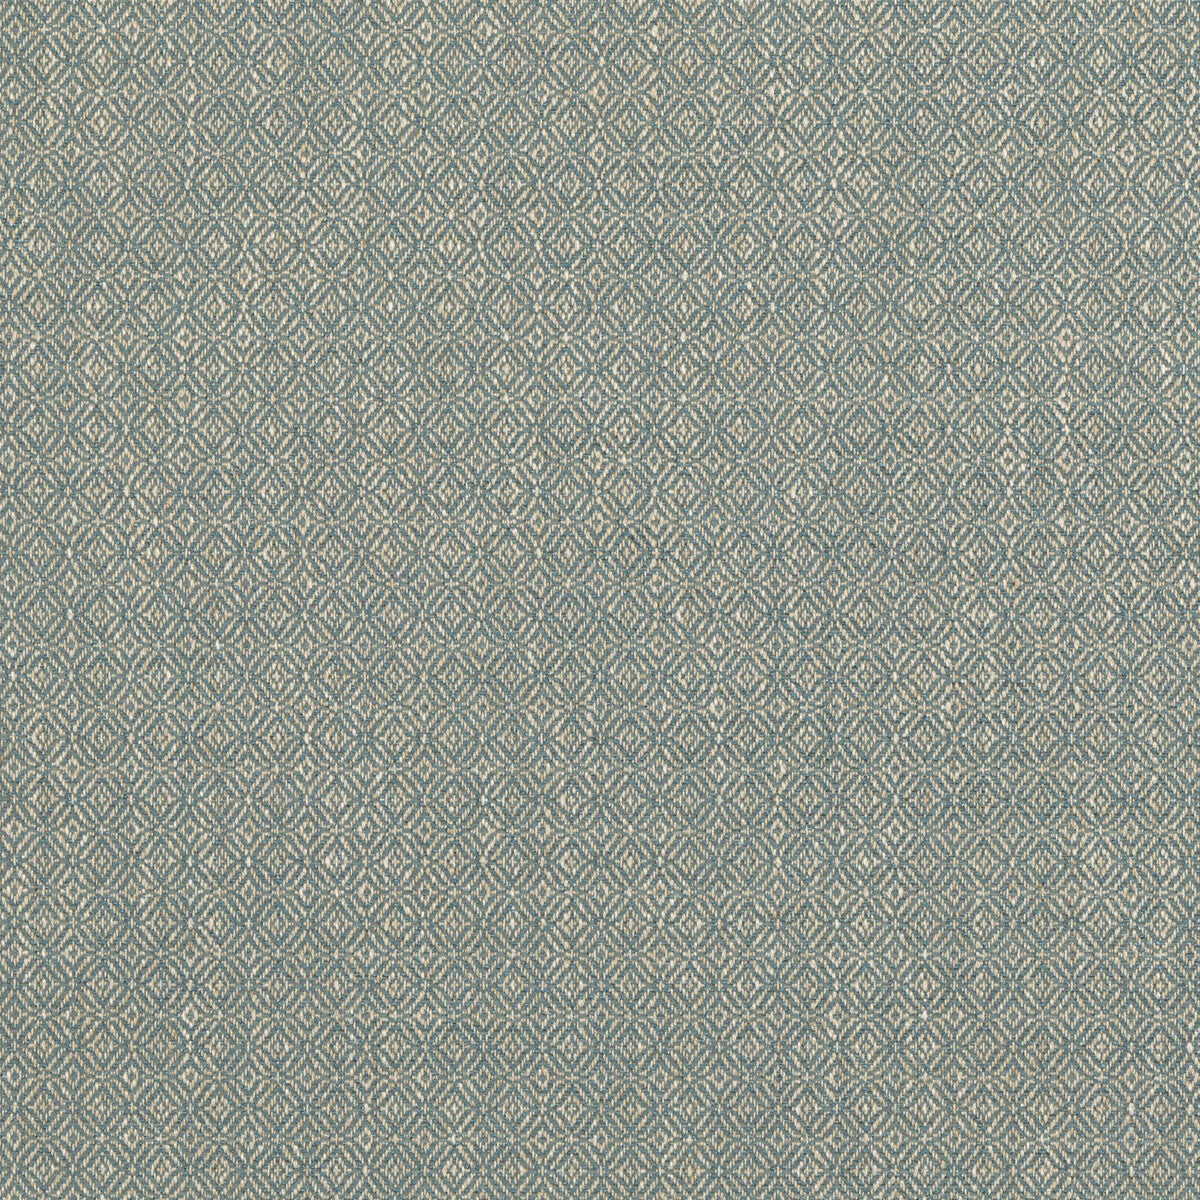 Kenton fabric in soft blue color - pattern BF10868.605.0 - by G P &amp; J Baker in the Essential Colours II collection